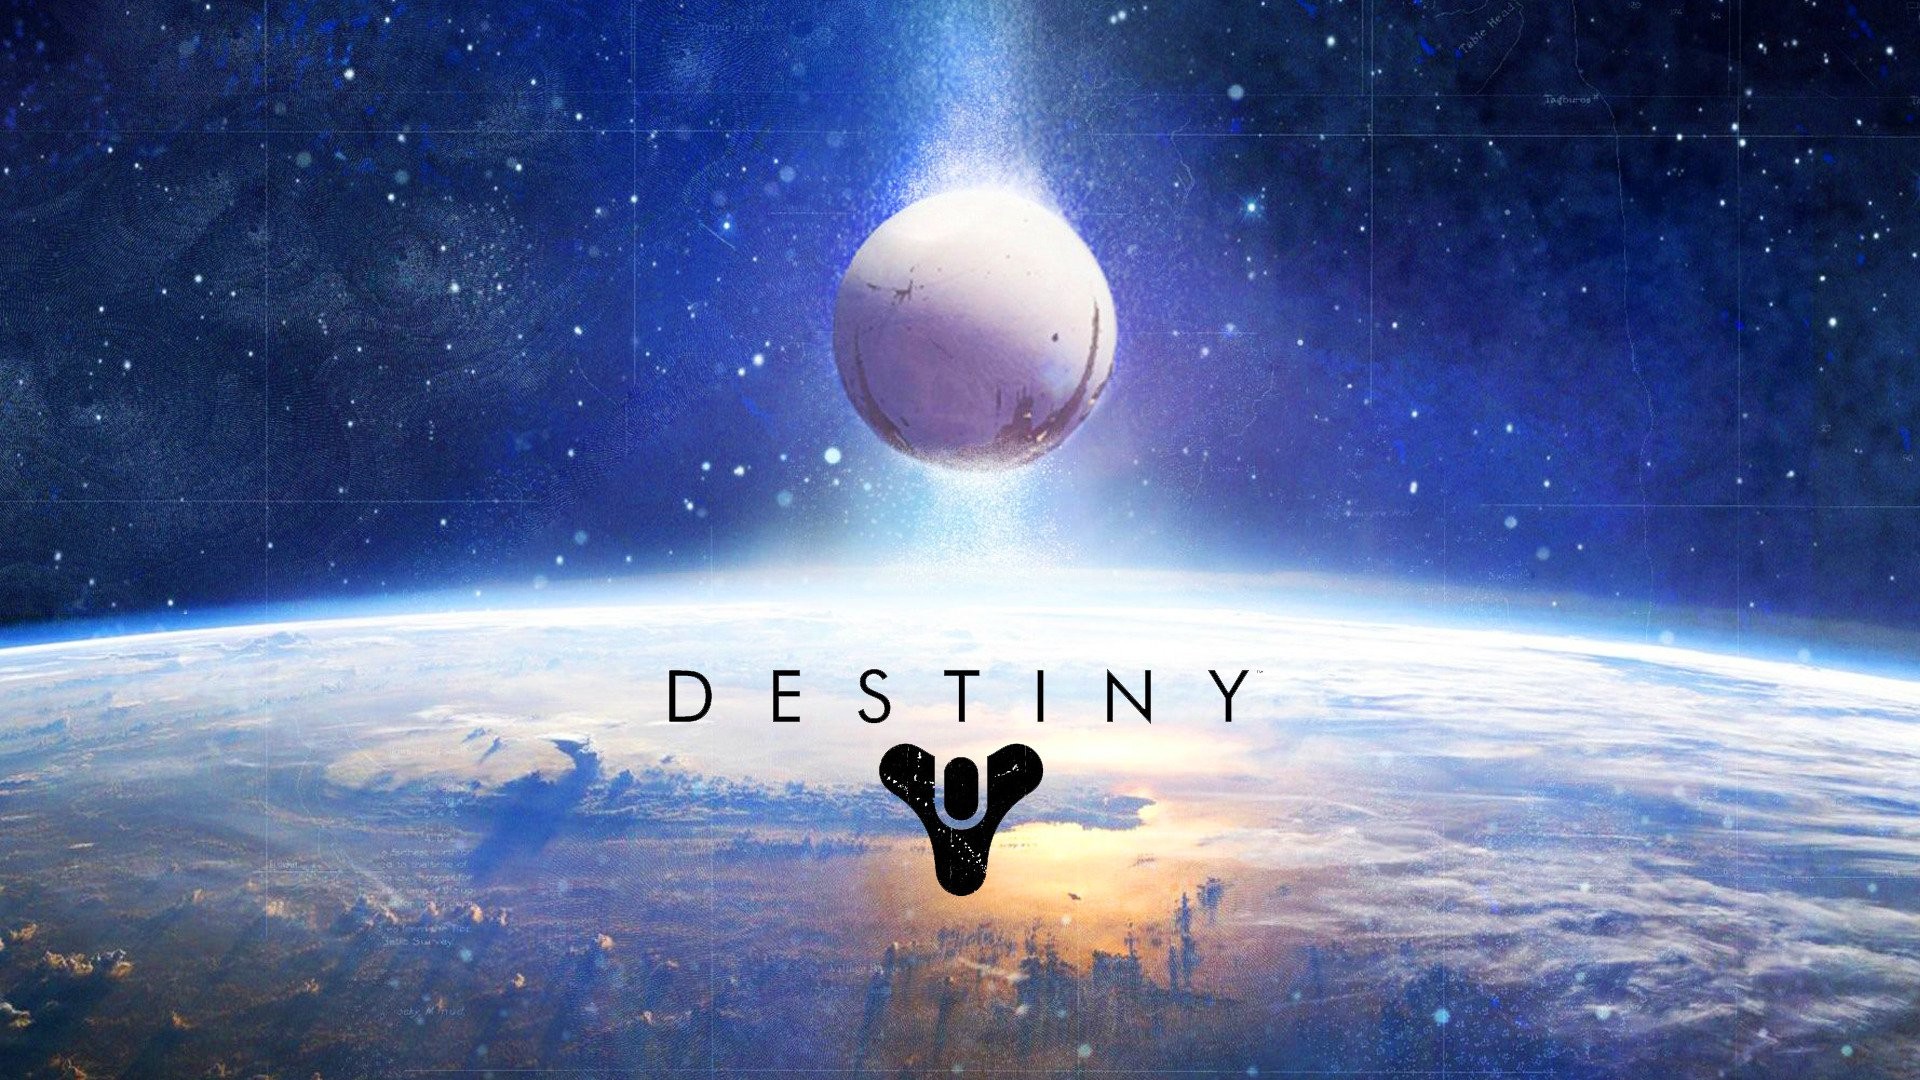 Destiny Wallpapers Pictures Images 19201080